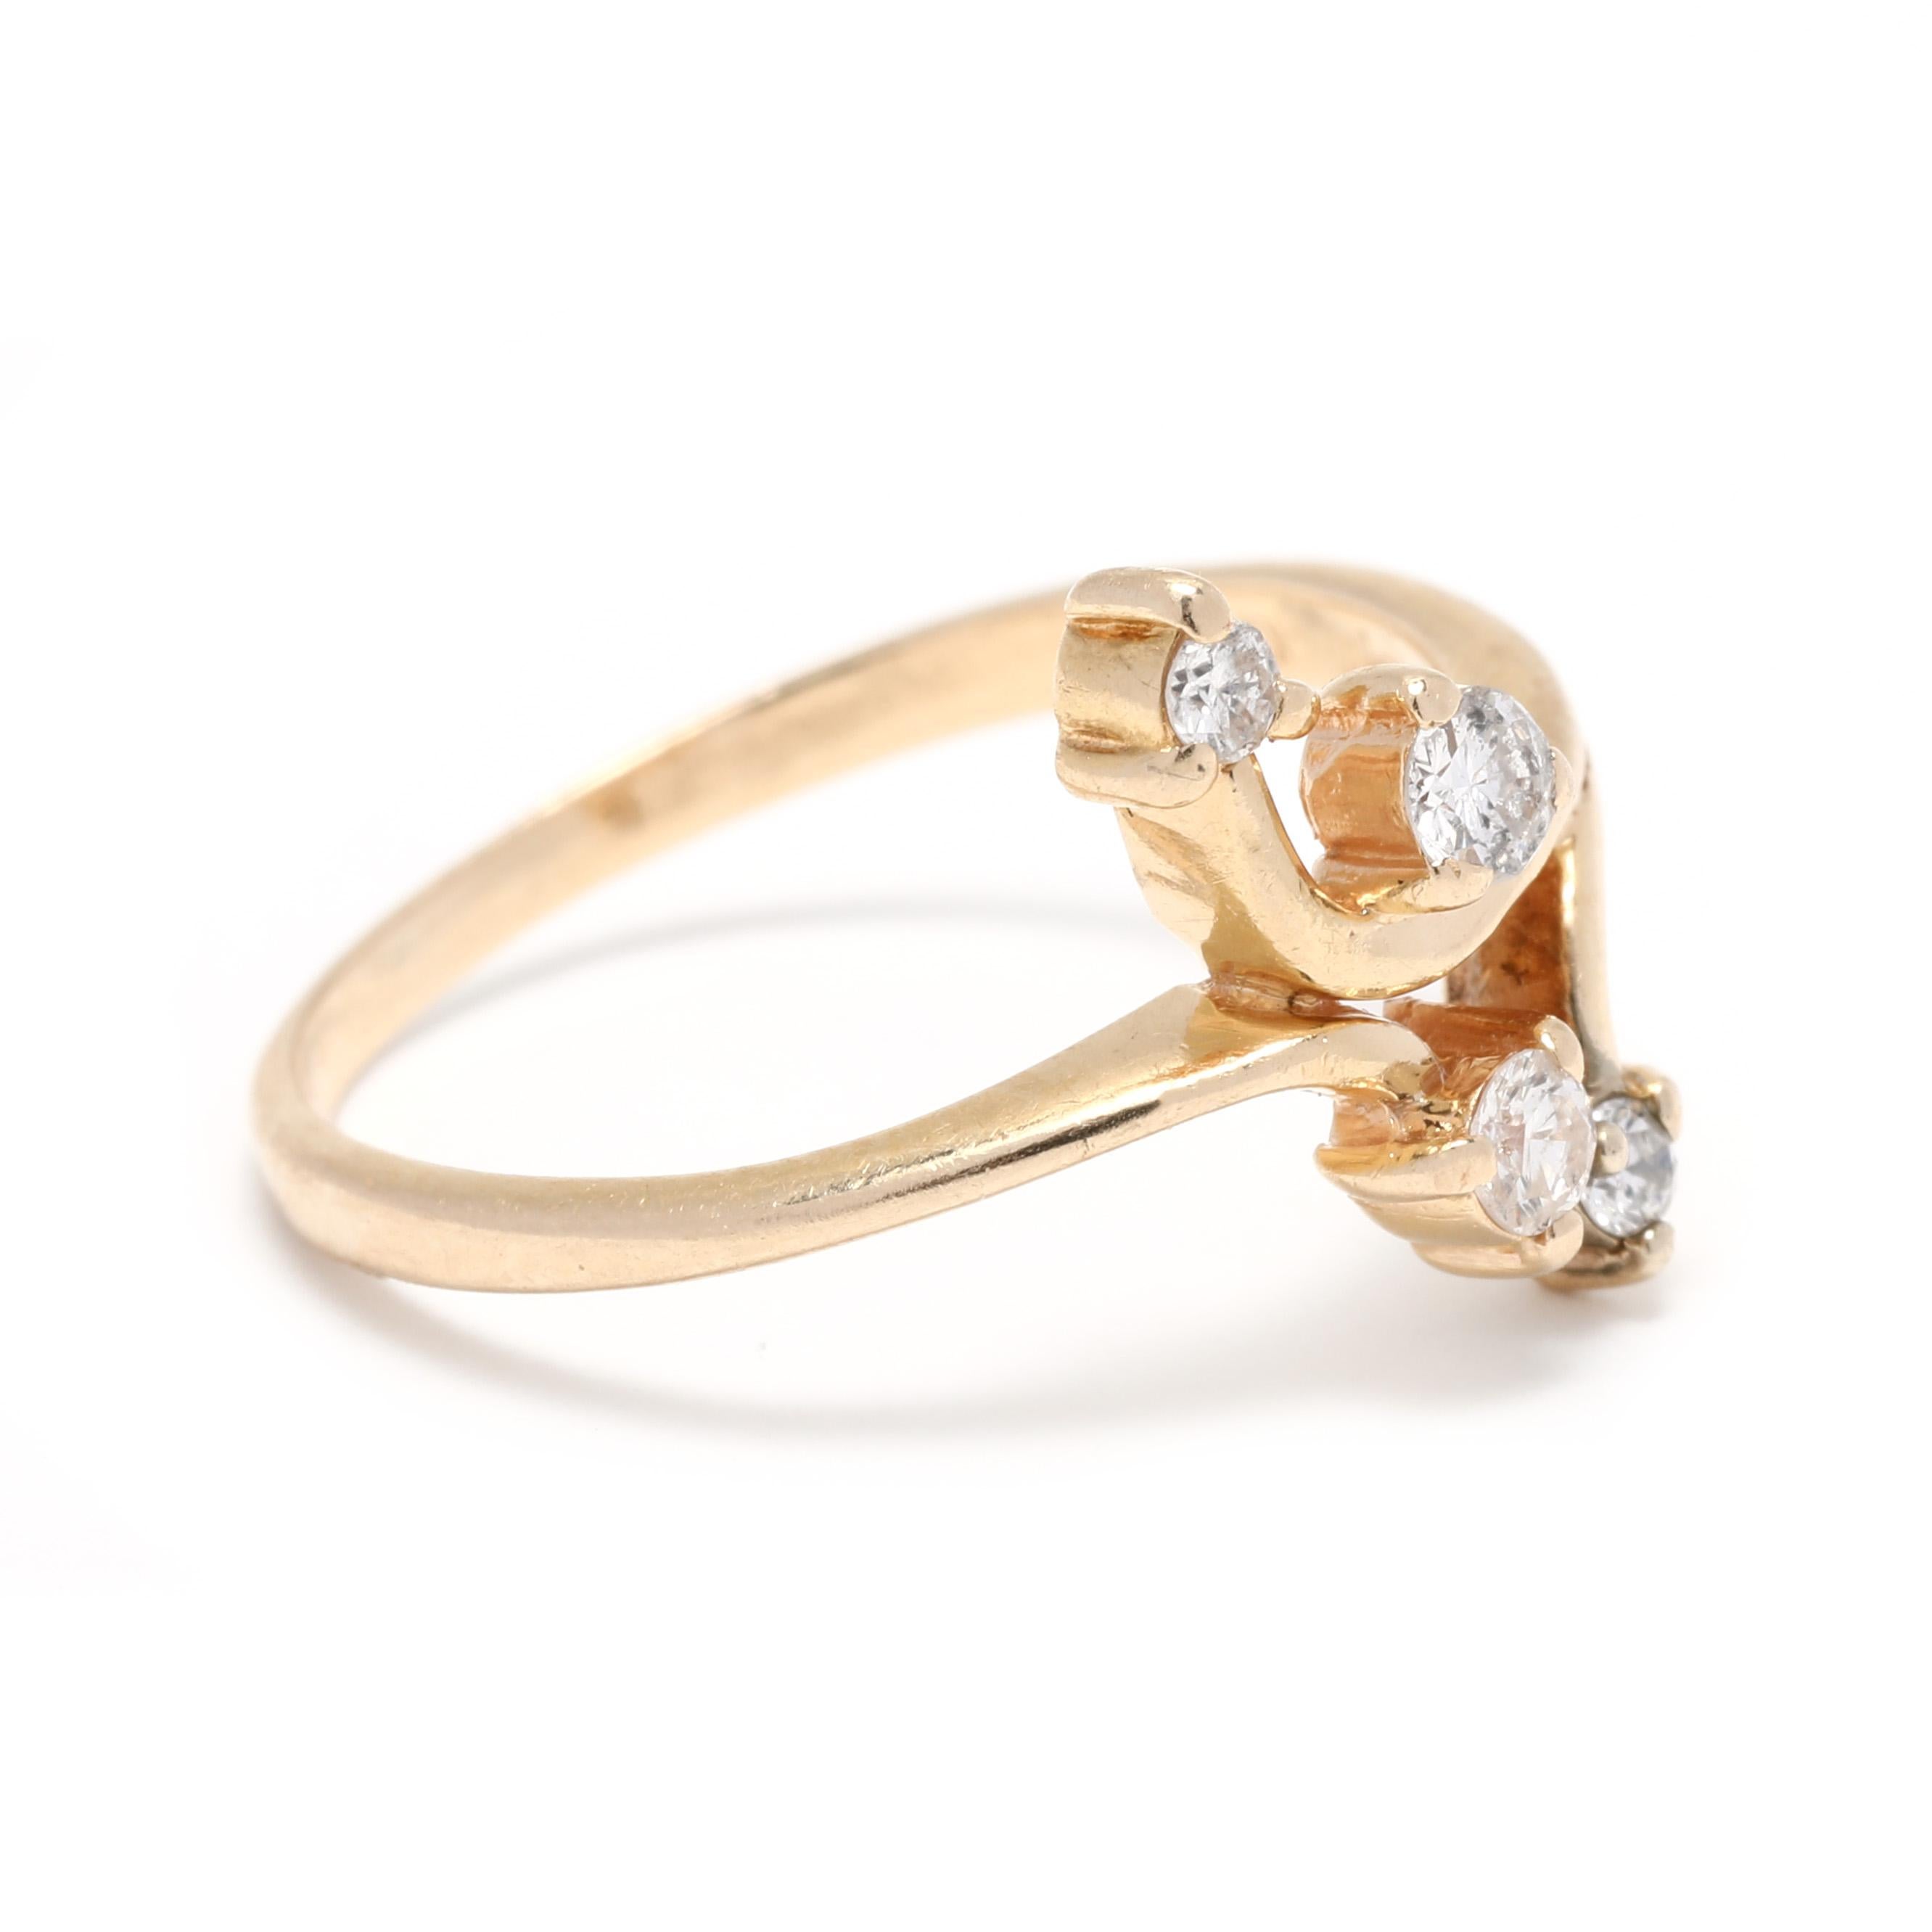 This stunning 0.20ctw diamond bypass ring is crafted in 14K yellow gold and is a size 6.75. Perfect for a special occasion, this diamond cluster ring features a crossover design with round brilliant-cut diamonds set in a prong setting. Its elegant